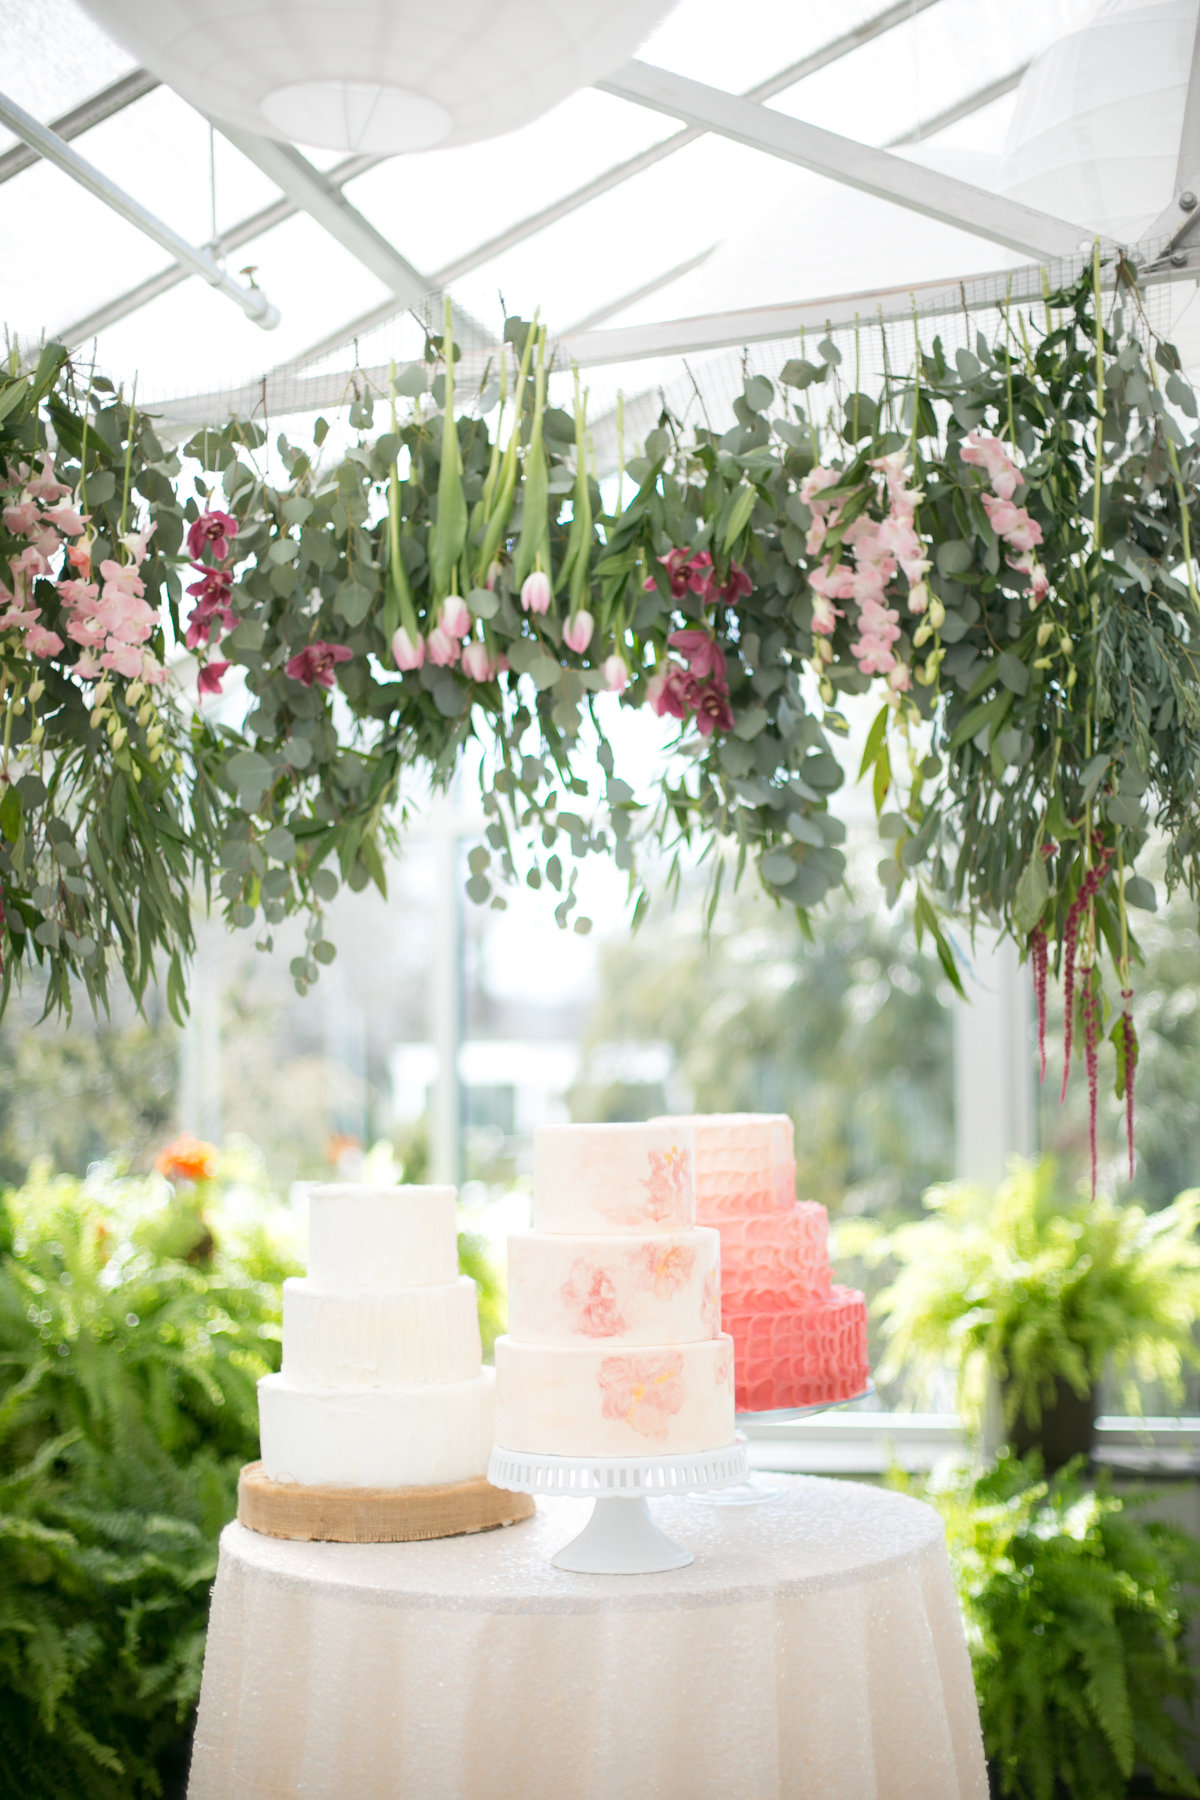 3 white and pink wedding cakes